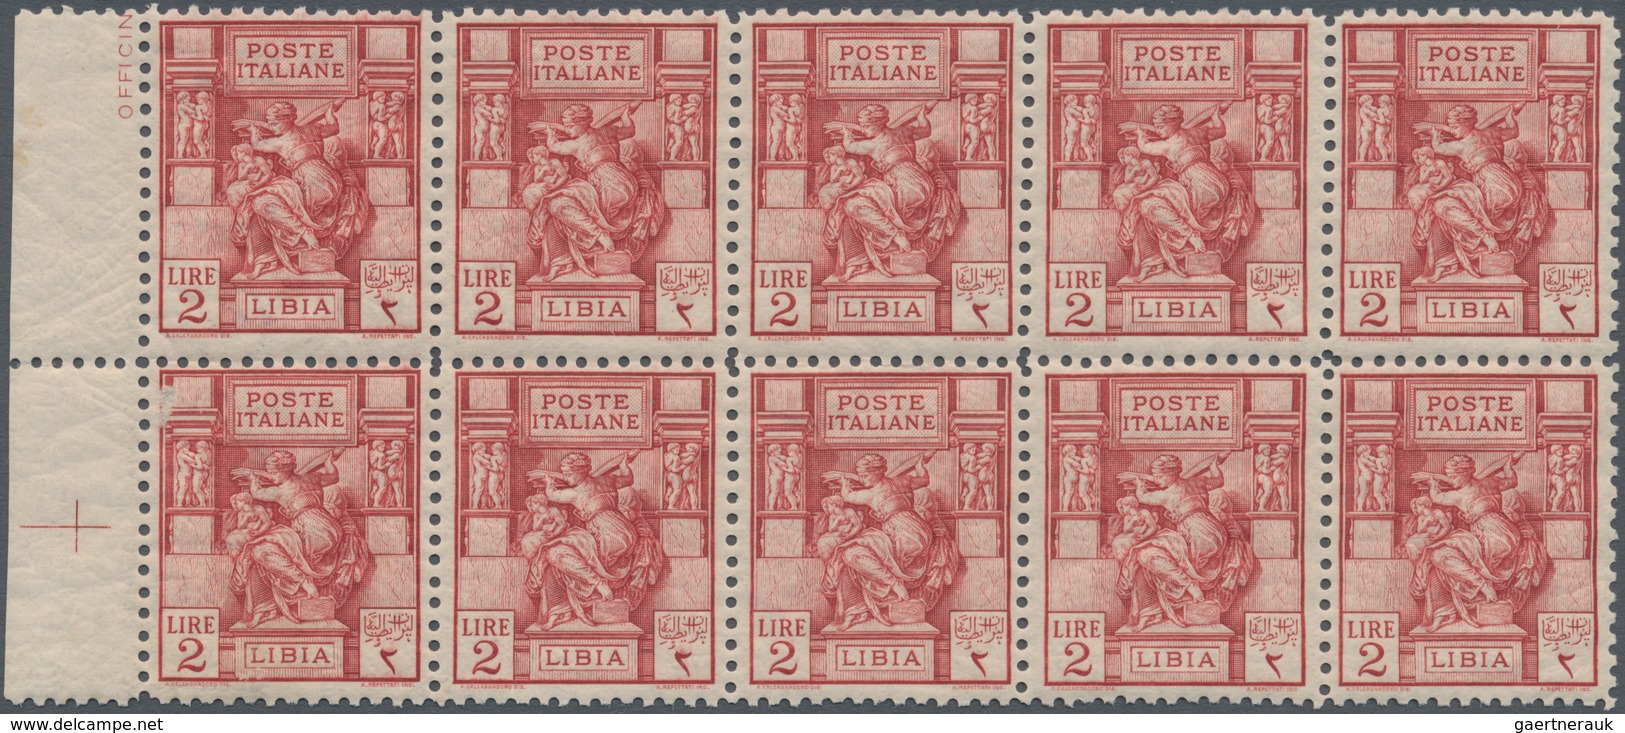 Italienisch-Libyen: 1926, Definitive Issue 2l. Carmine ‚Libyan Sybille‘ Perf. 11 In A Lot With 40 St - Libia